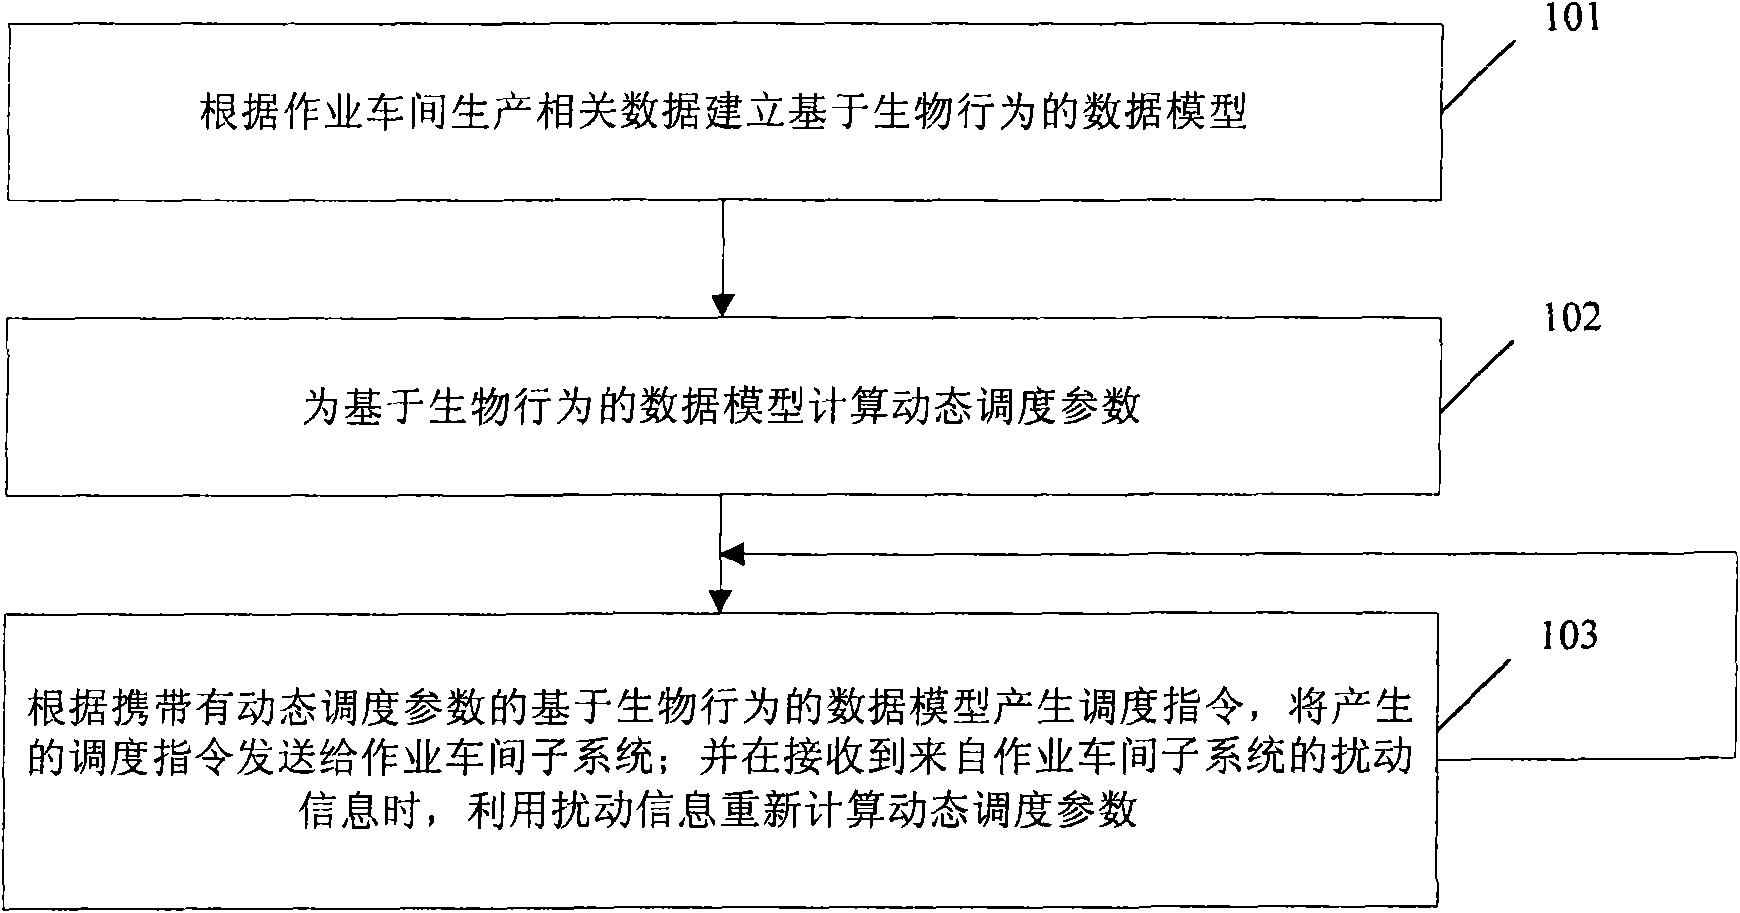 Method and system for realizing real-time scheduling of job shop